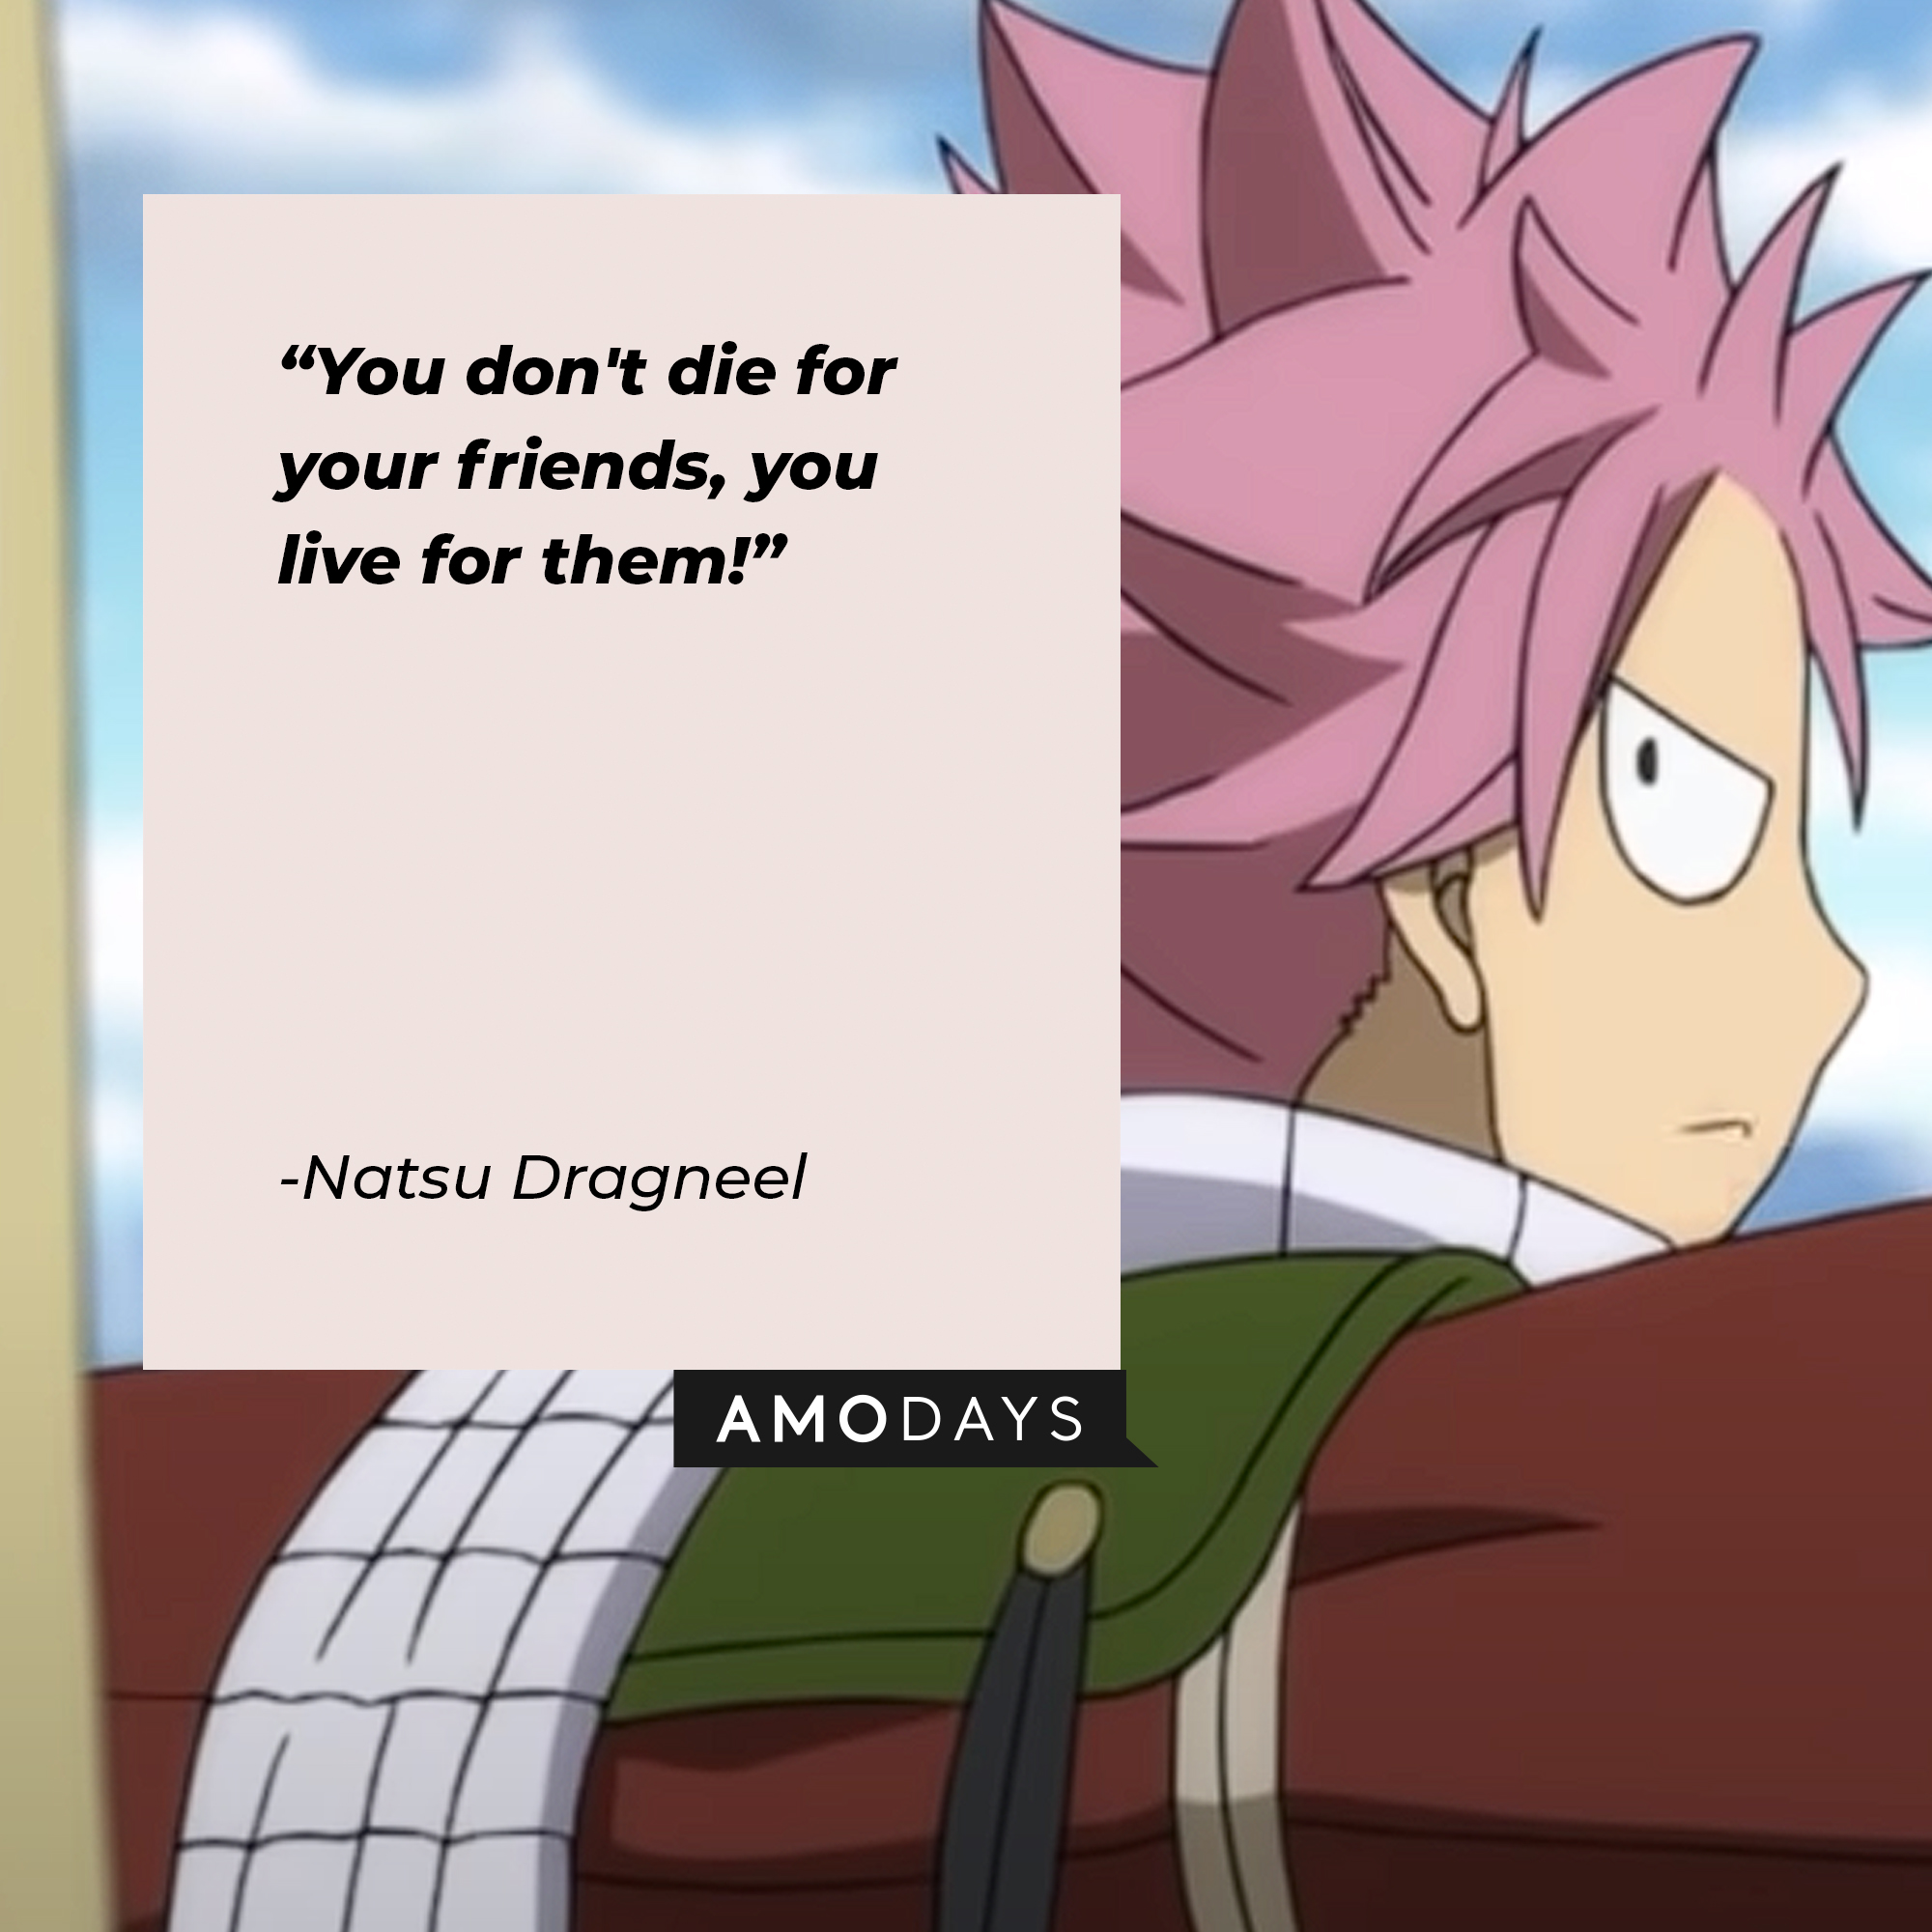 Natsu Dragneel's quote: "You don't die for your friends, you live for them!" | Image: AmoDays